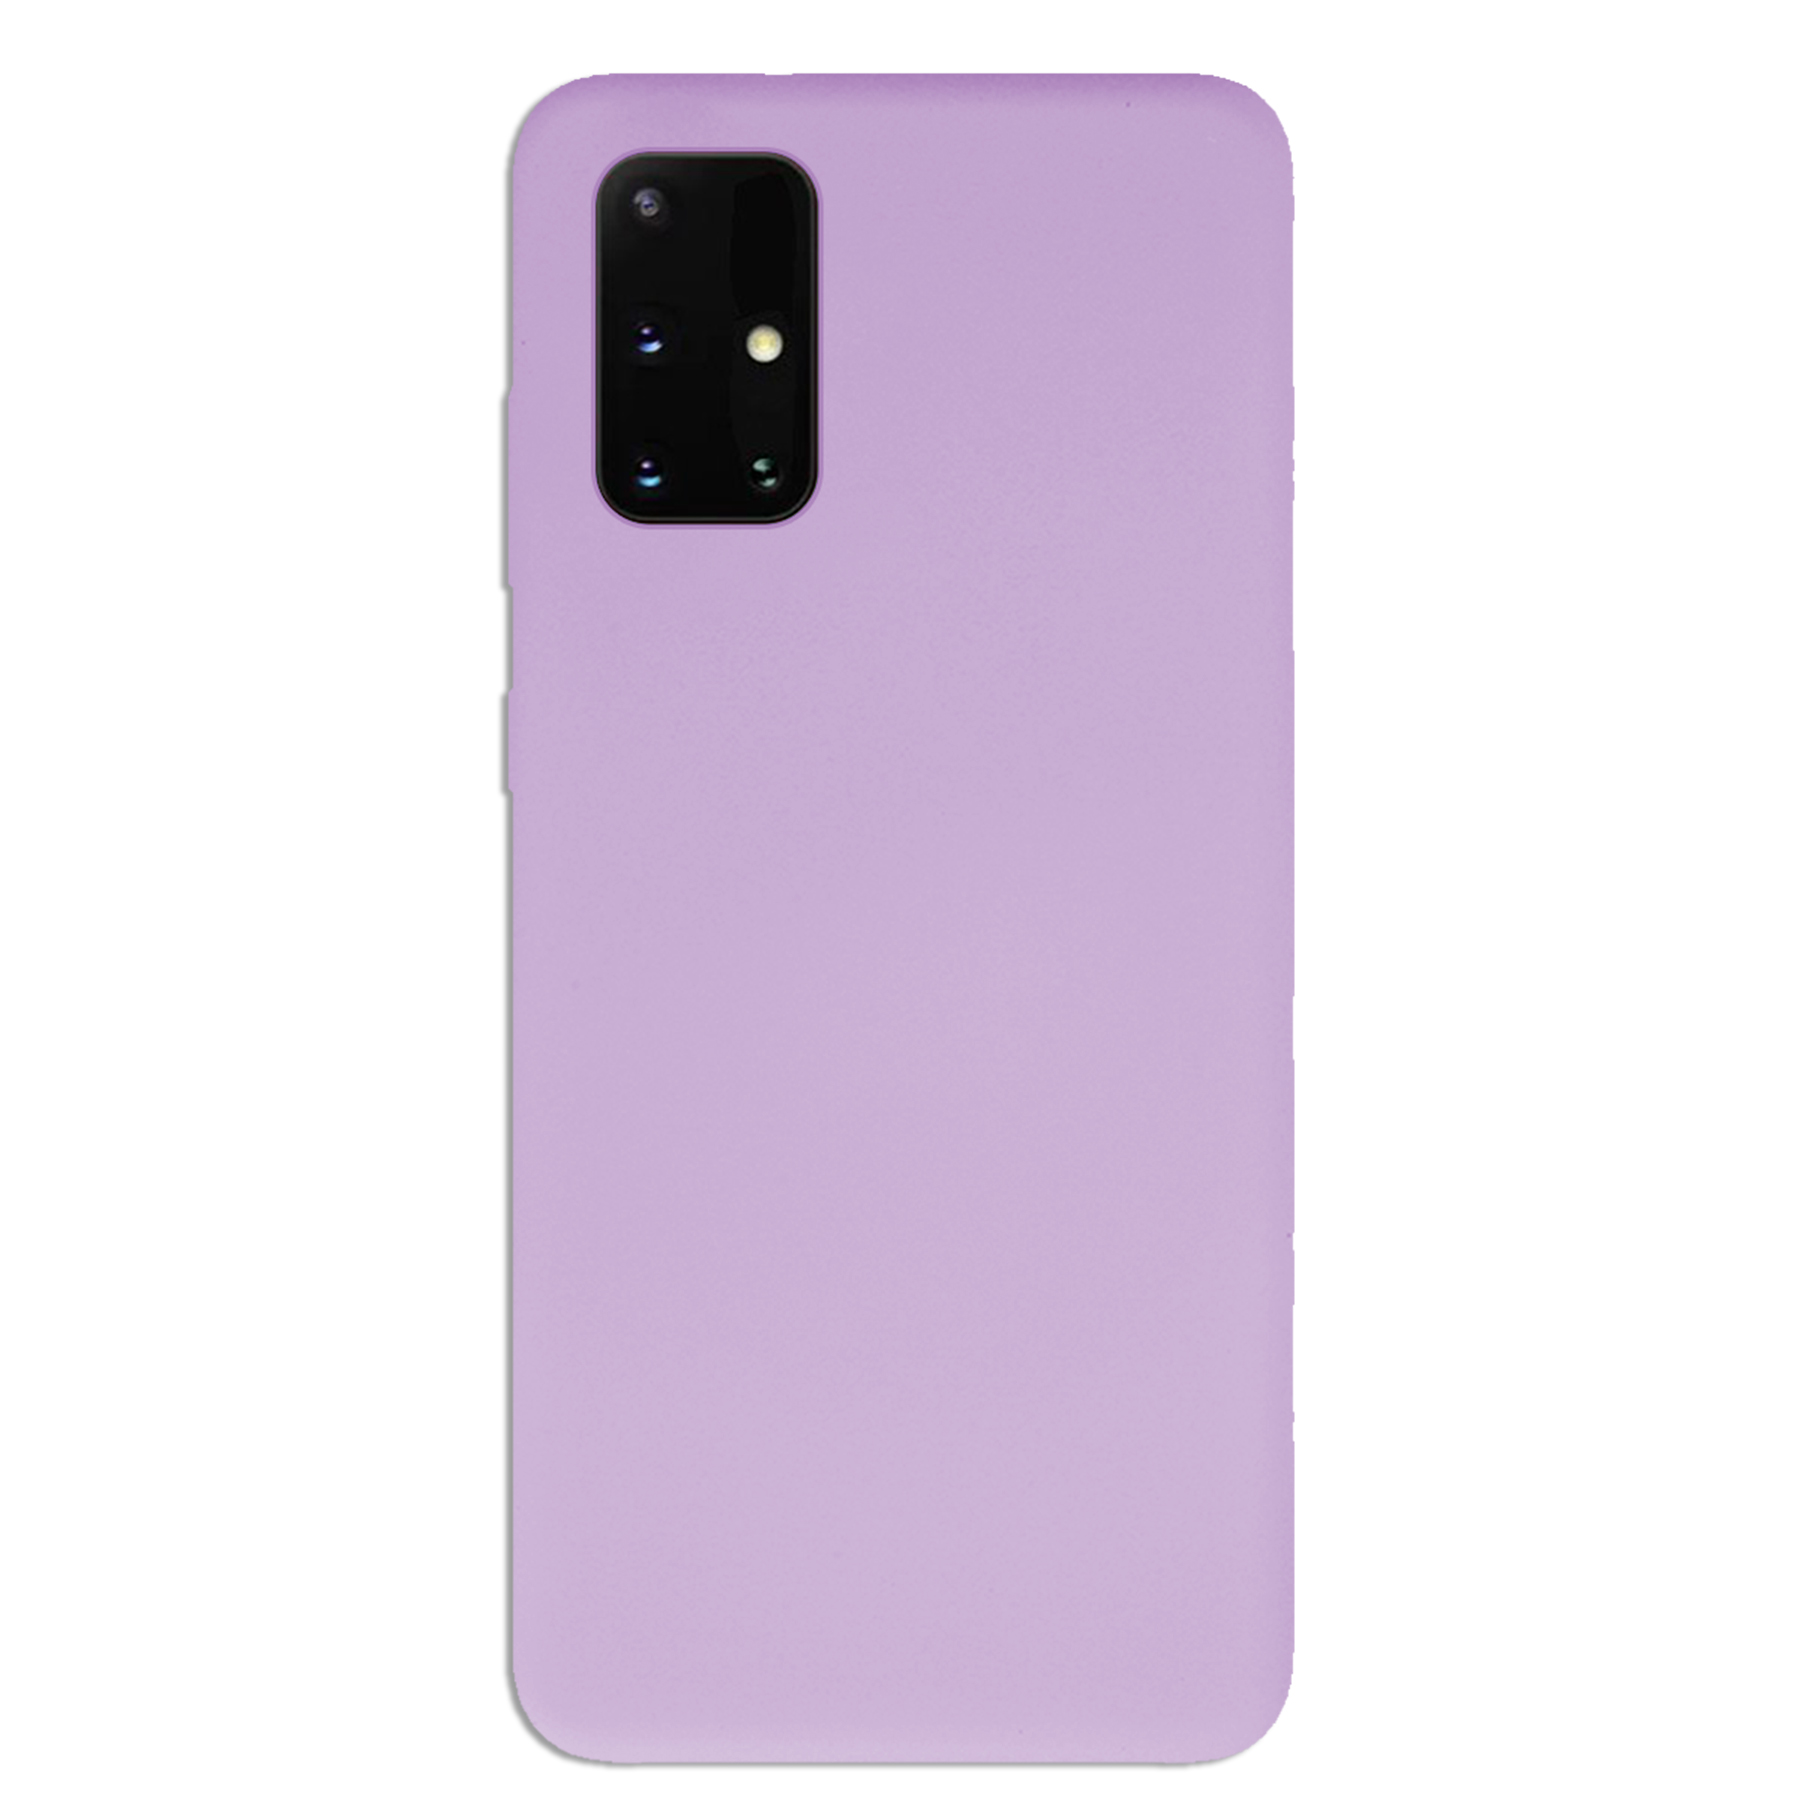 11T Pastell Backcover, Soft Xiaomi, ENERGY MTB 11T, Case, MORE Silikon Pro, Lila